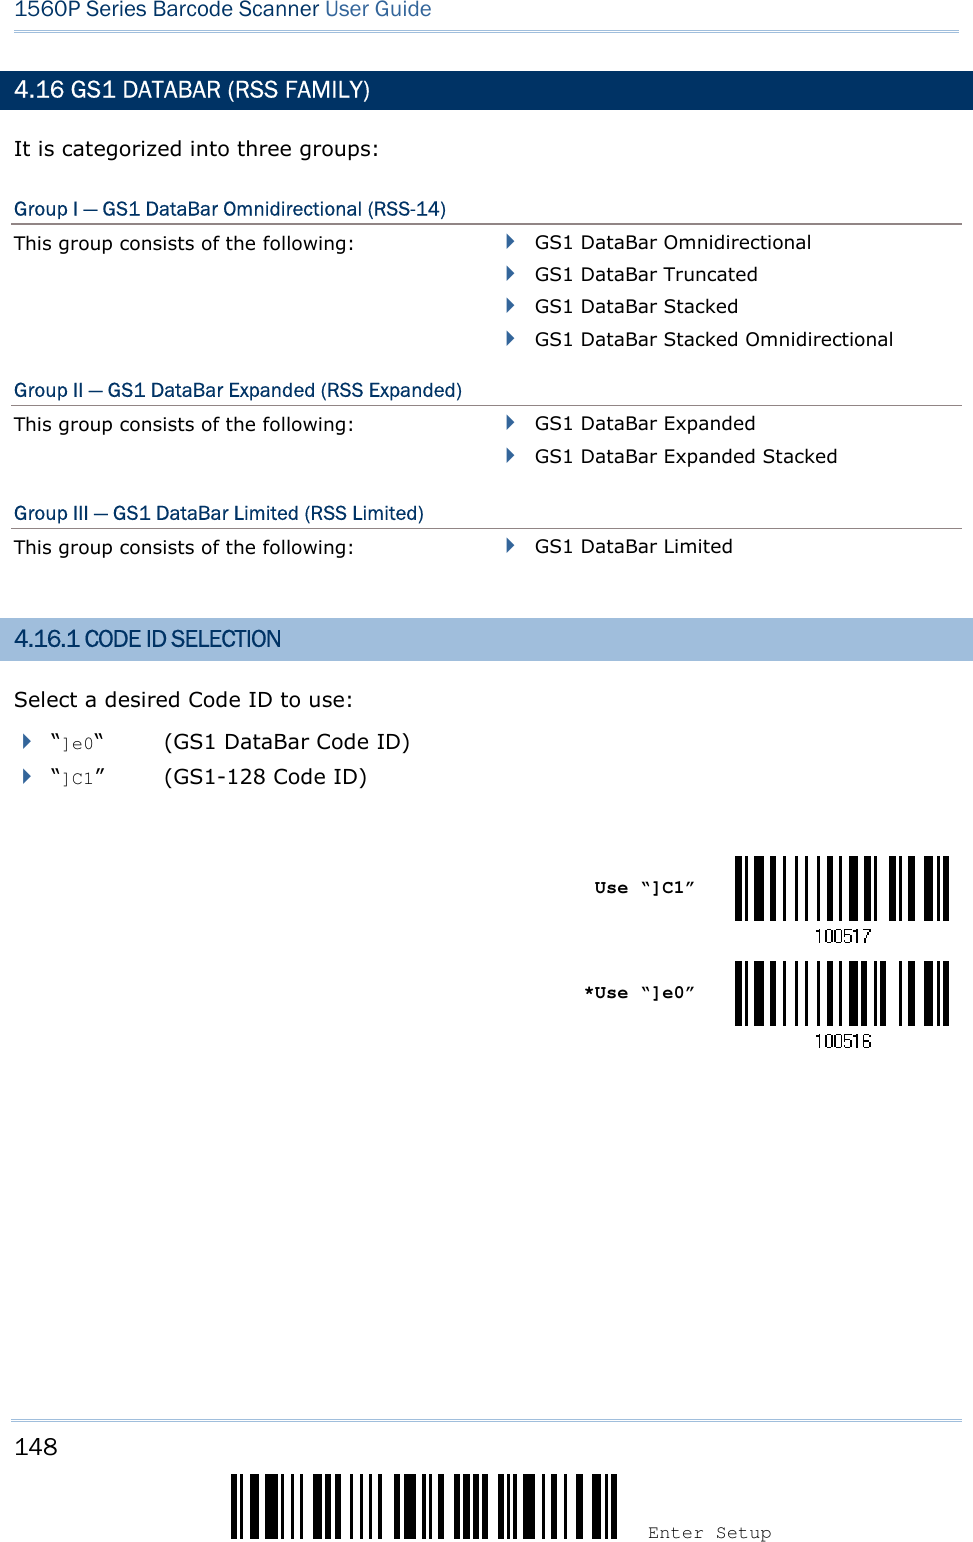 148 Enter Setup 1560P Series Barcode Scanner User Guide 4.16 GS1 DATABAR (RSS FAMILY) It is categorized into three groups: Group I — GS1 DataBar Omnidirectional (RSS-14) This group consists of the following:  GS1 DataBar OmnidirectionalGS1 DataBar TruncatedGS1 DataBar StackedGS1 DataBar Stacked OmnidirectionalGroup II — GS1 DataBar Expanded (RSS Expanded) This group consists of the following:  GS1 DataBar ExpandedGS1 DataBar Expanded StackedGroup III — GS1 DataBar Limited (RSS Limited) This group consists of the following:  GS1 DataBar Limited4.16.1 CODE ID SELECTION Select a desired Code ID to use: “]e0“ (GS1 DataBar Code ID) “]C1” (GS1-128 Code ID) Use “]C1” *Use “]e0”